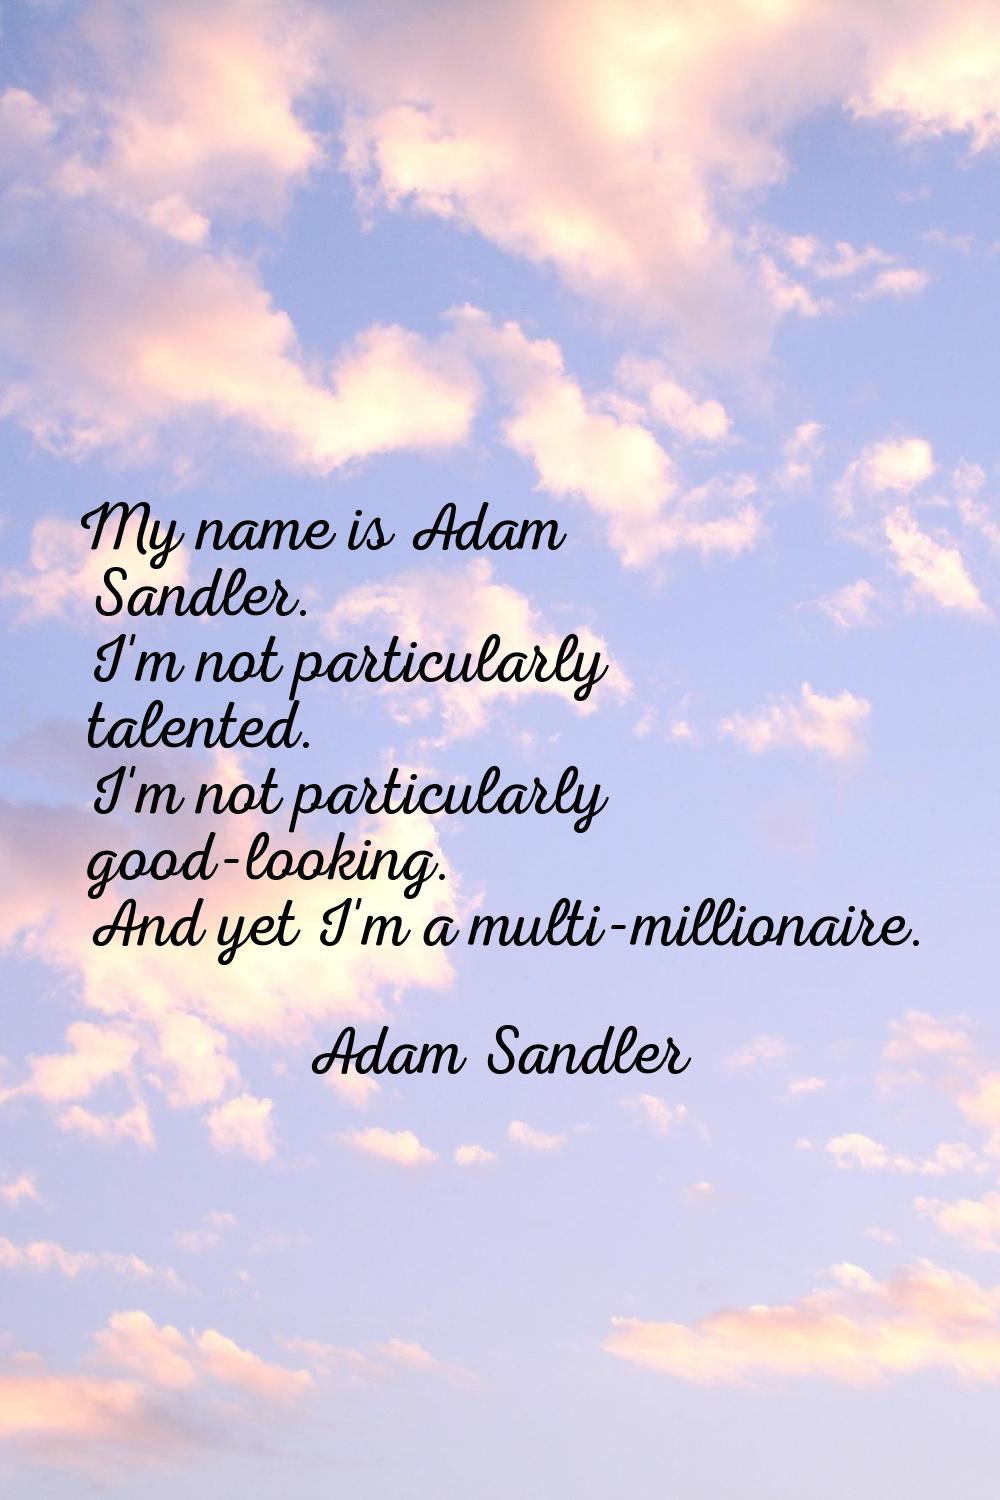 My name is Adam Sandler. I'm not particularly talented. I'm not particularly good-looking. And yet 